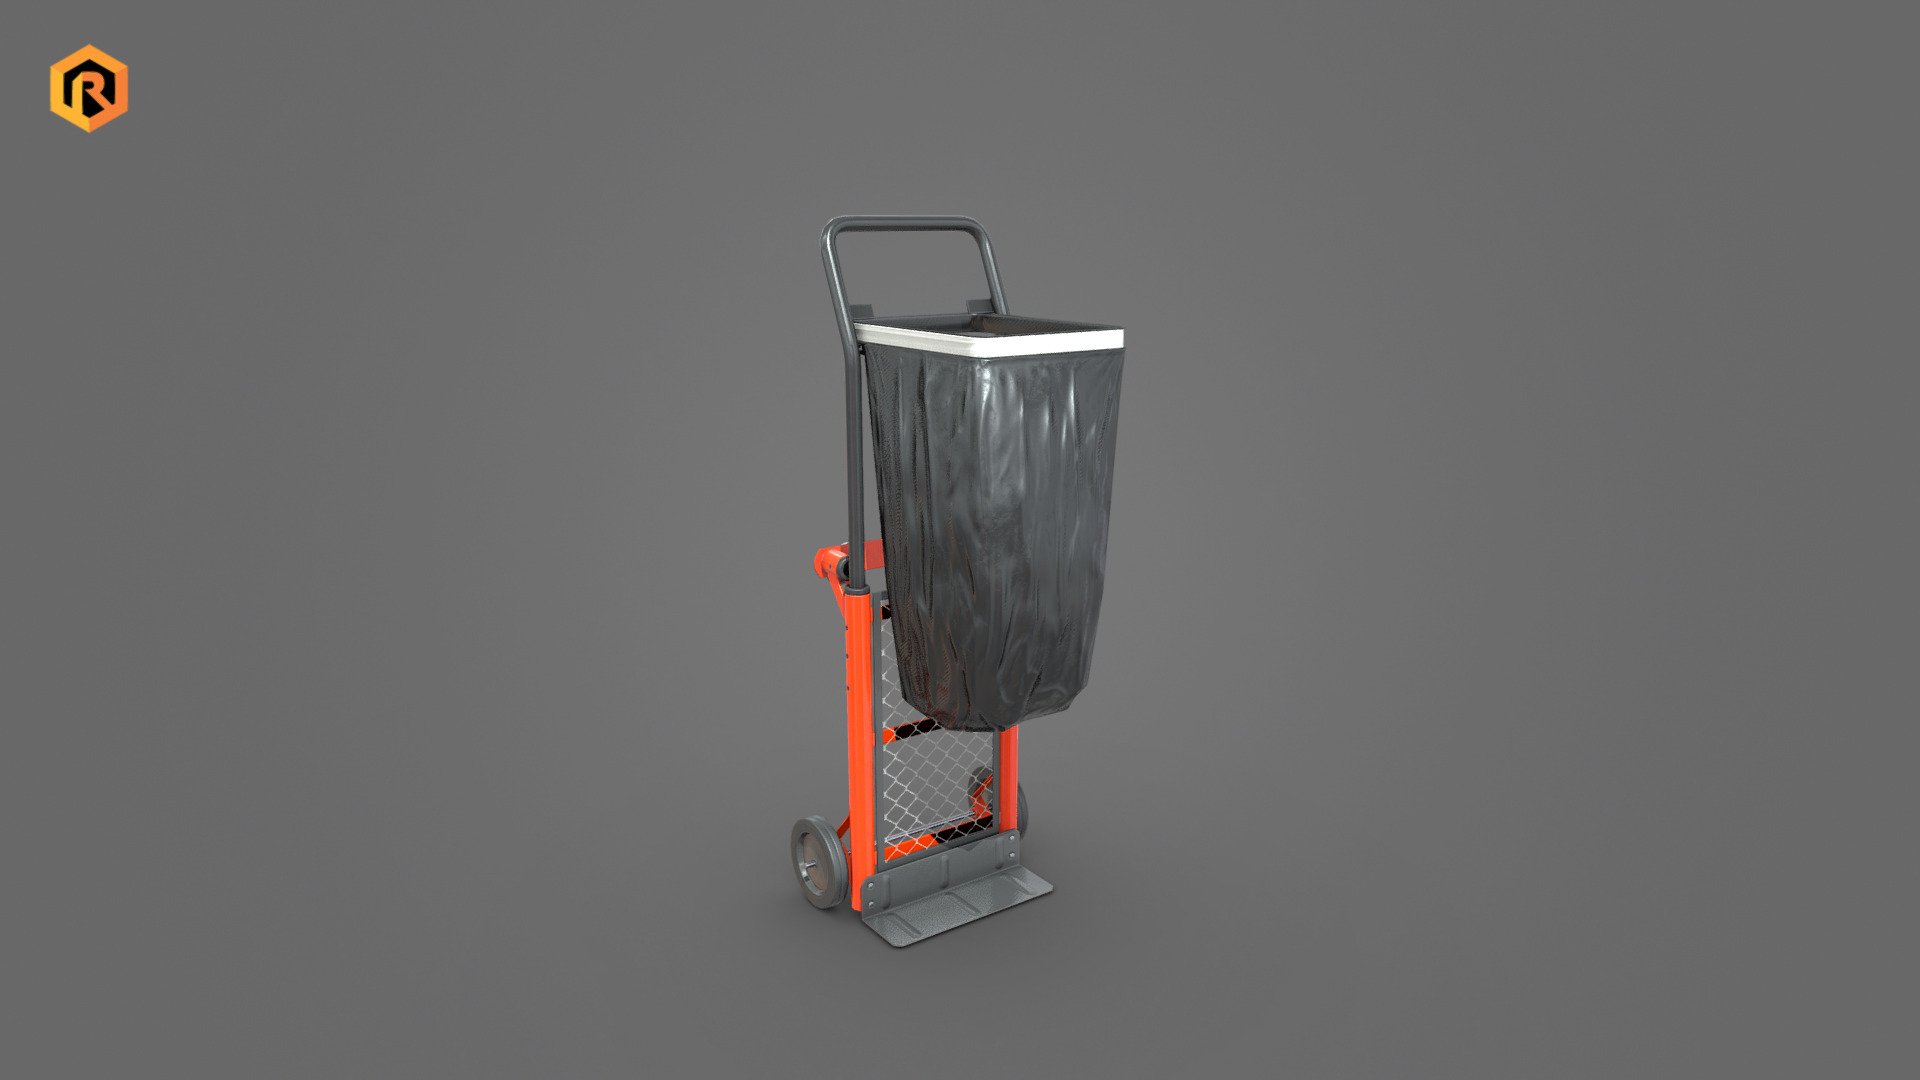 Low-poly PBR 3D model of Heavy Duty Folding Cart.

The model is divided into several elements to make it easier to conﬁgure the object into different variants. 

Technical details:




4 PBR textures sets. (Body, Alpha, GarbageBag, Wheels) 

4161 Triangles

4488  Vertices

The model is divided into few 6 objects (BodyArm, GarbageRng, GarbageBag, Wheels_Down, Wheels_Up)

There are also few predefined  variants of object.

Model is completely unwrapped.

Model is fully textured with all materials applied.

Pivot points are correctly placed to suit optional animation process.

Model scaled to approximate real world size (centimeters).

All nodes, materials and textures are appropriately named.

Lot of additional file formats included (Blender, Unity, Maya etc.)

More file formats are available in additional zip file on product page !  

Please feel free to contact me if you have any questions or need support for this asset 3d model